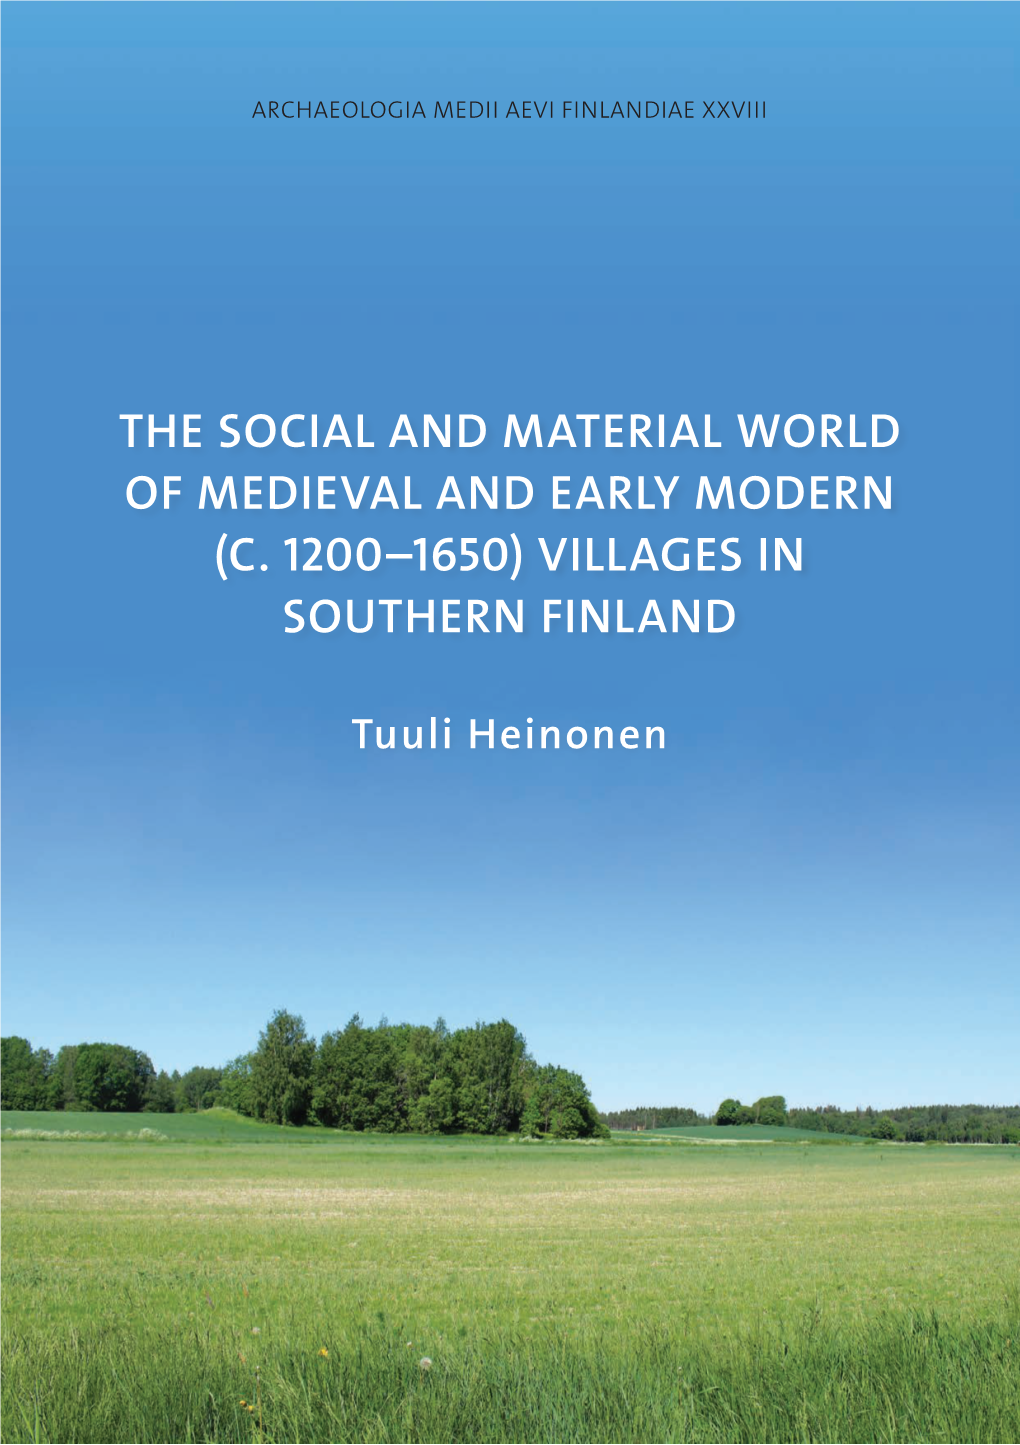 The Social and Material World of Medieval and Early Modern (C